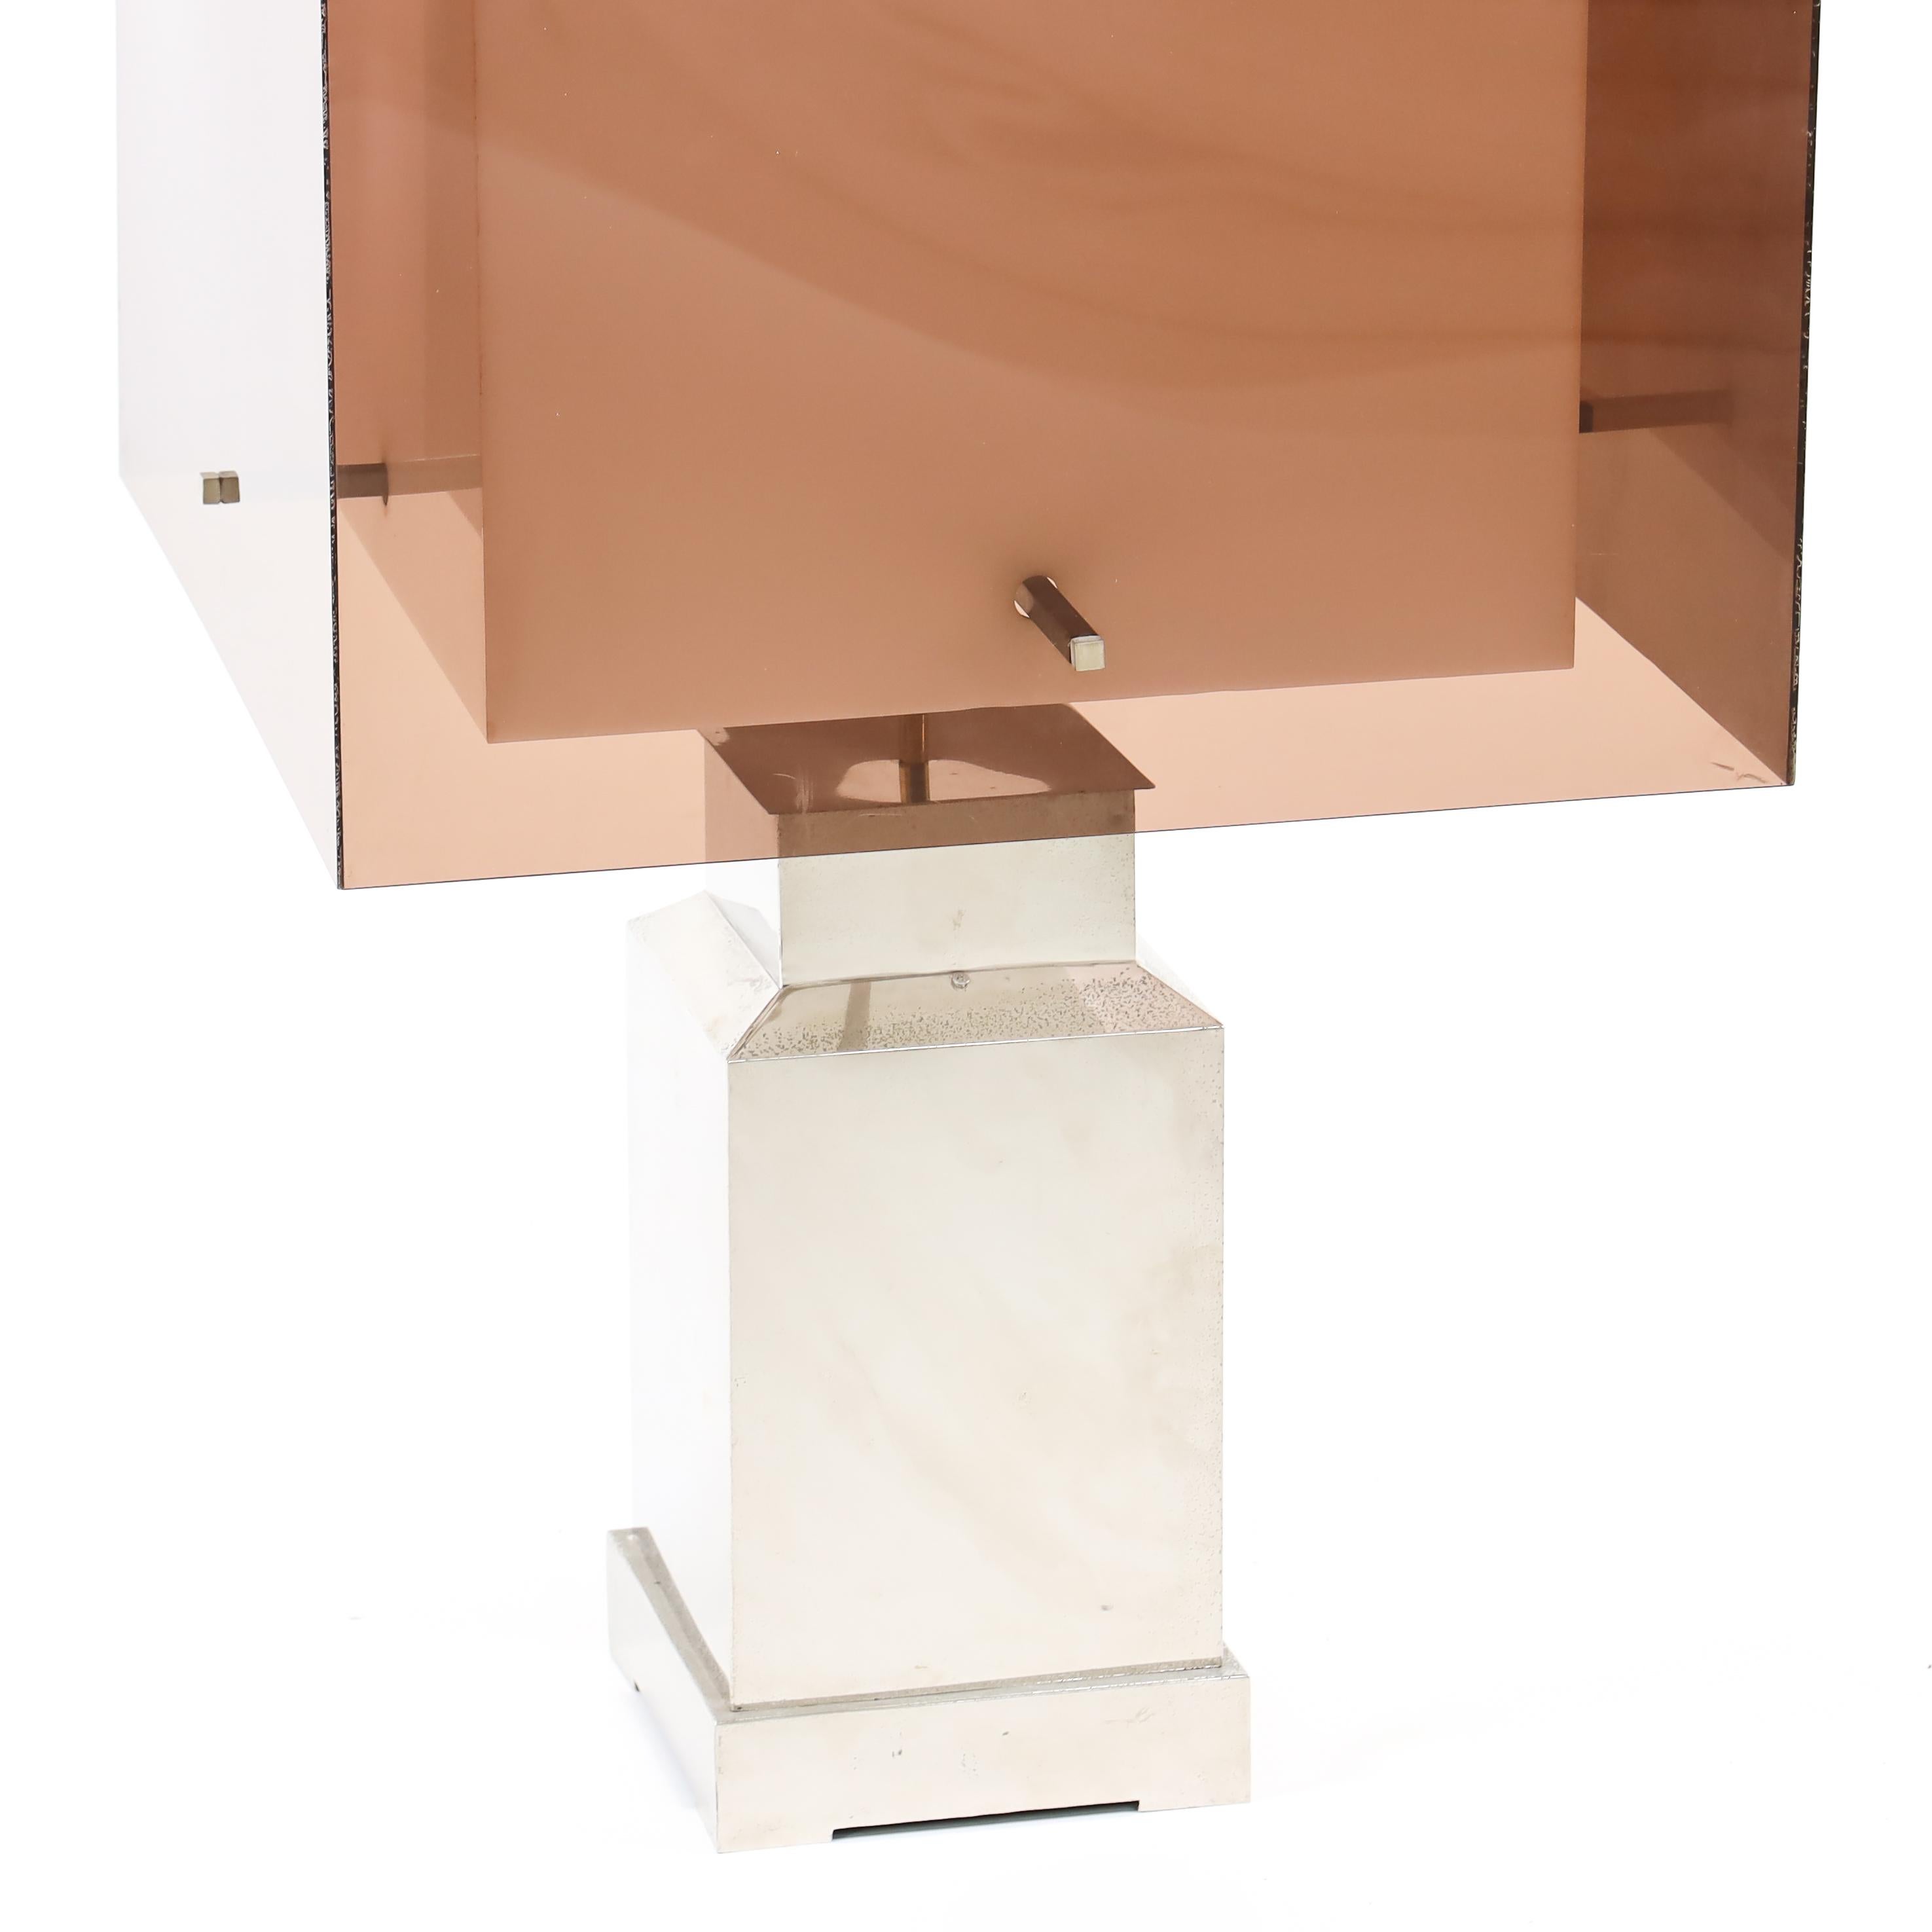 Large table lamp on a socketed stand made of metal with cubic plexiglass shade in brown and white.